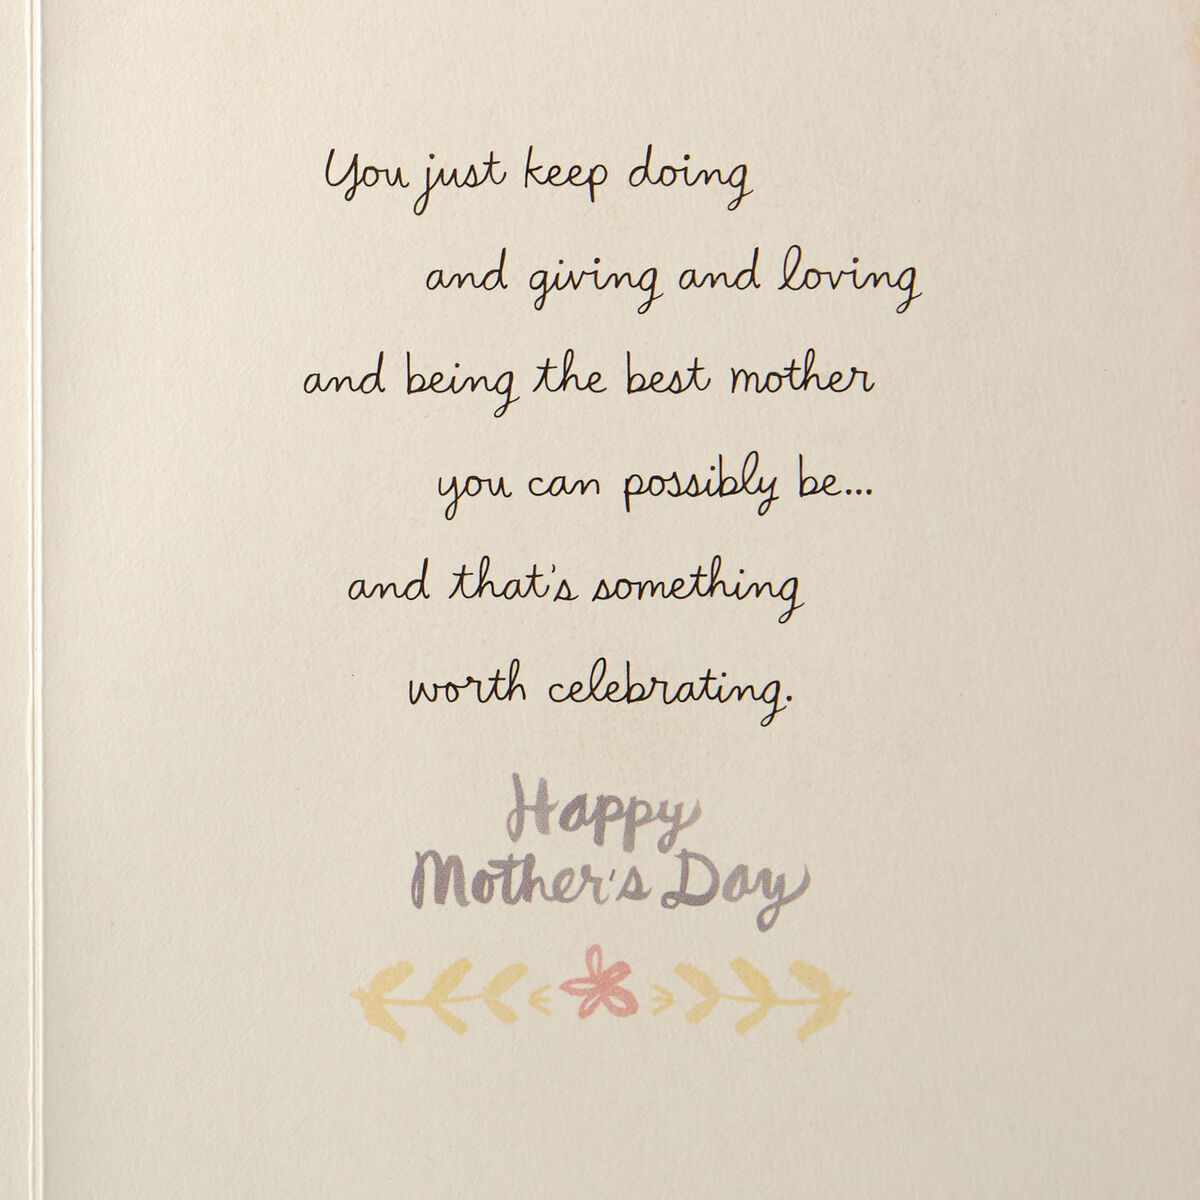 Woven Ribbon Mother's Day Card for Daughter - Greeting Cards - Hallmark